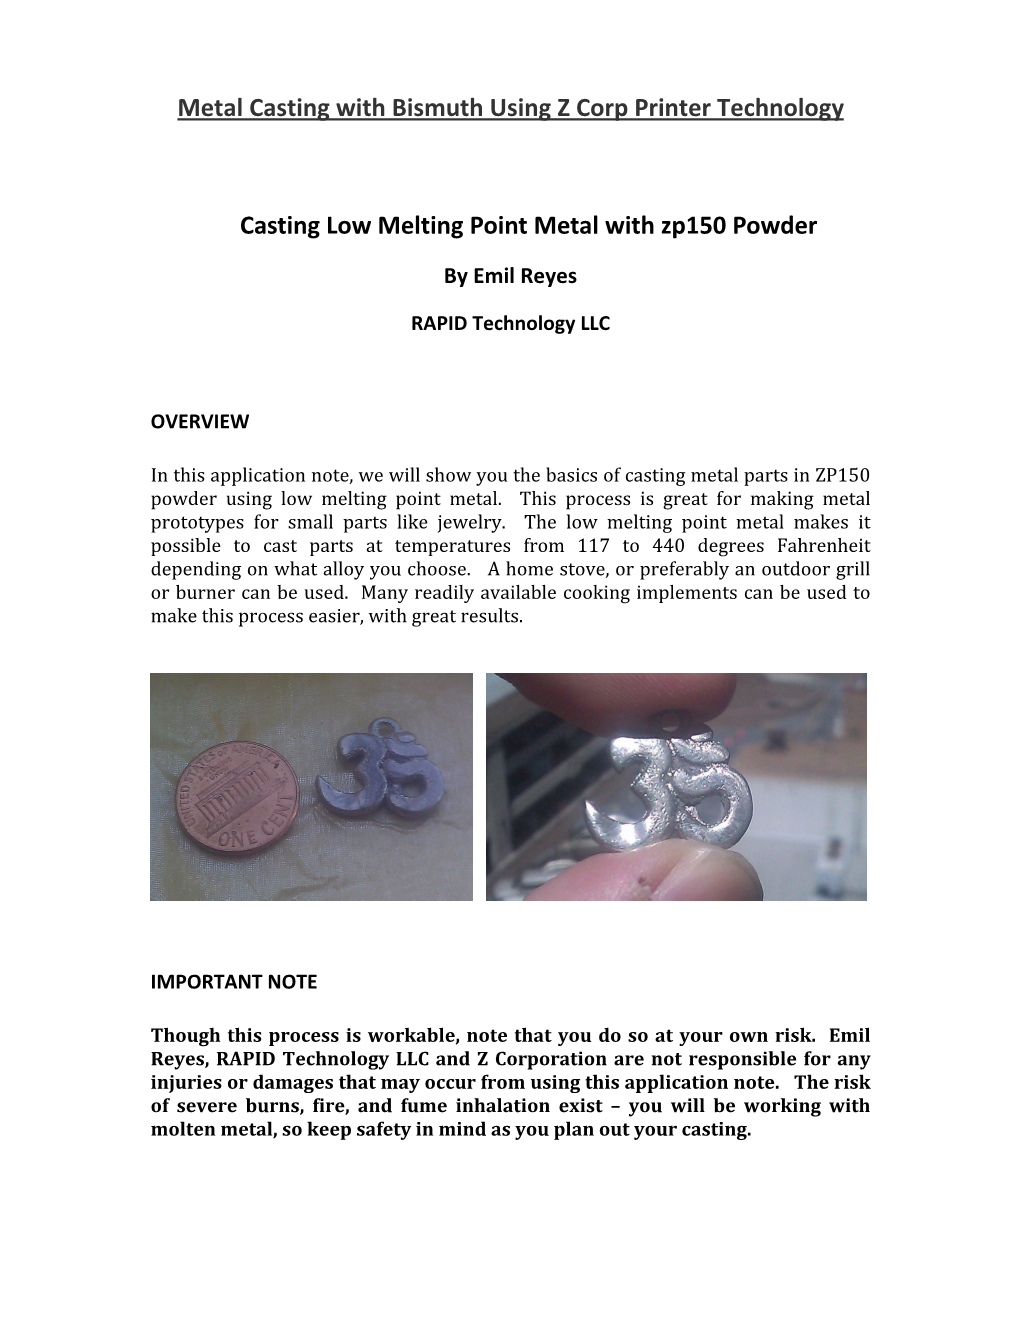 Casting Low Melting Point Metal with Zp150 Powder Metal Casting With